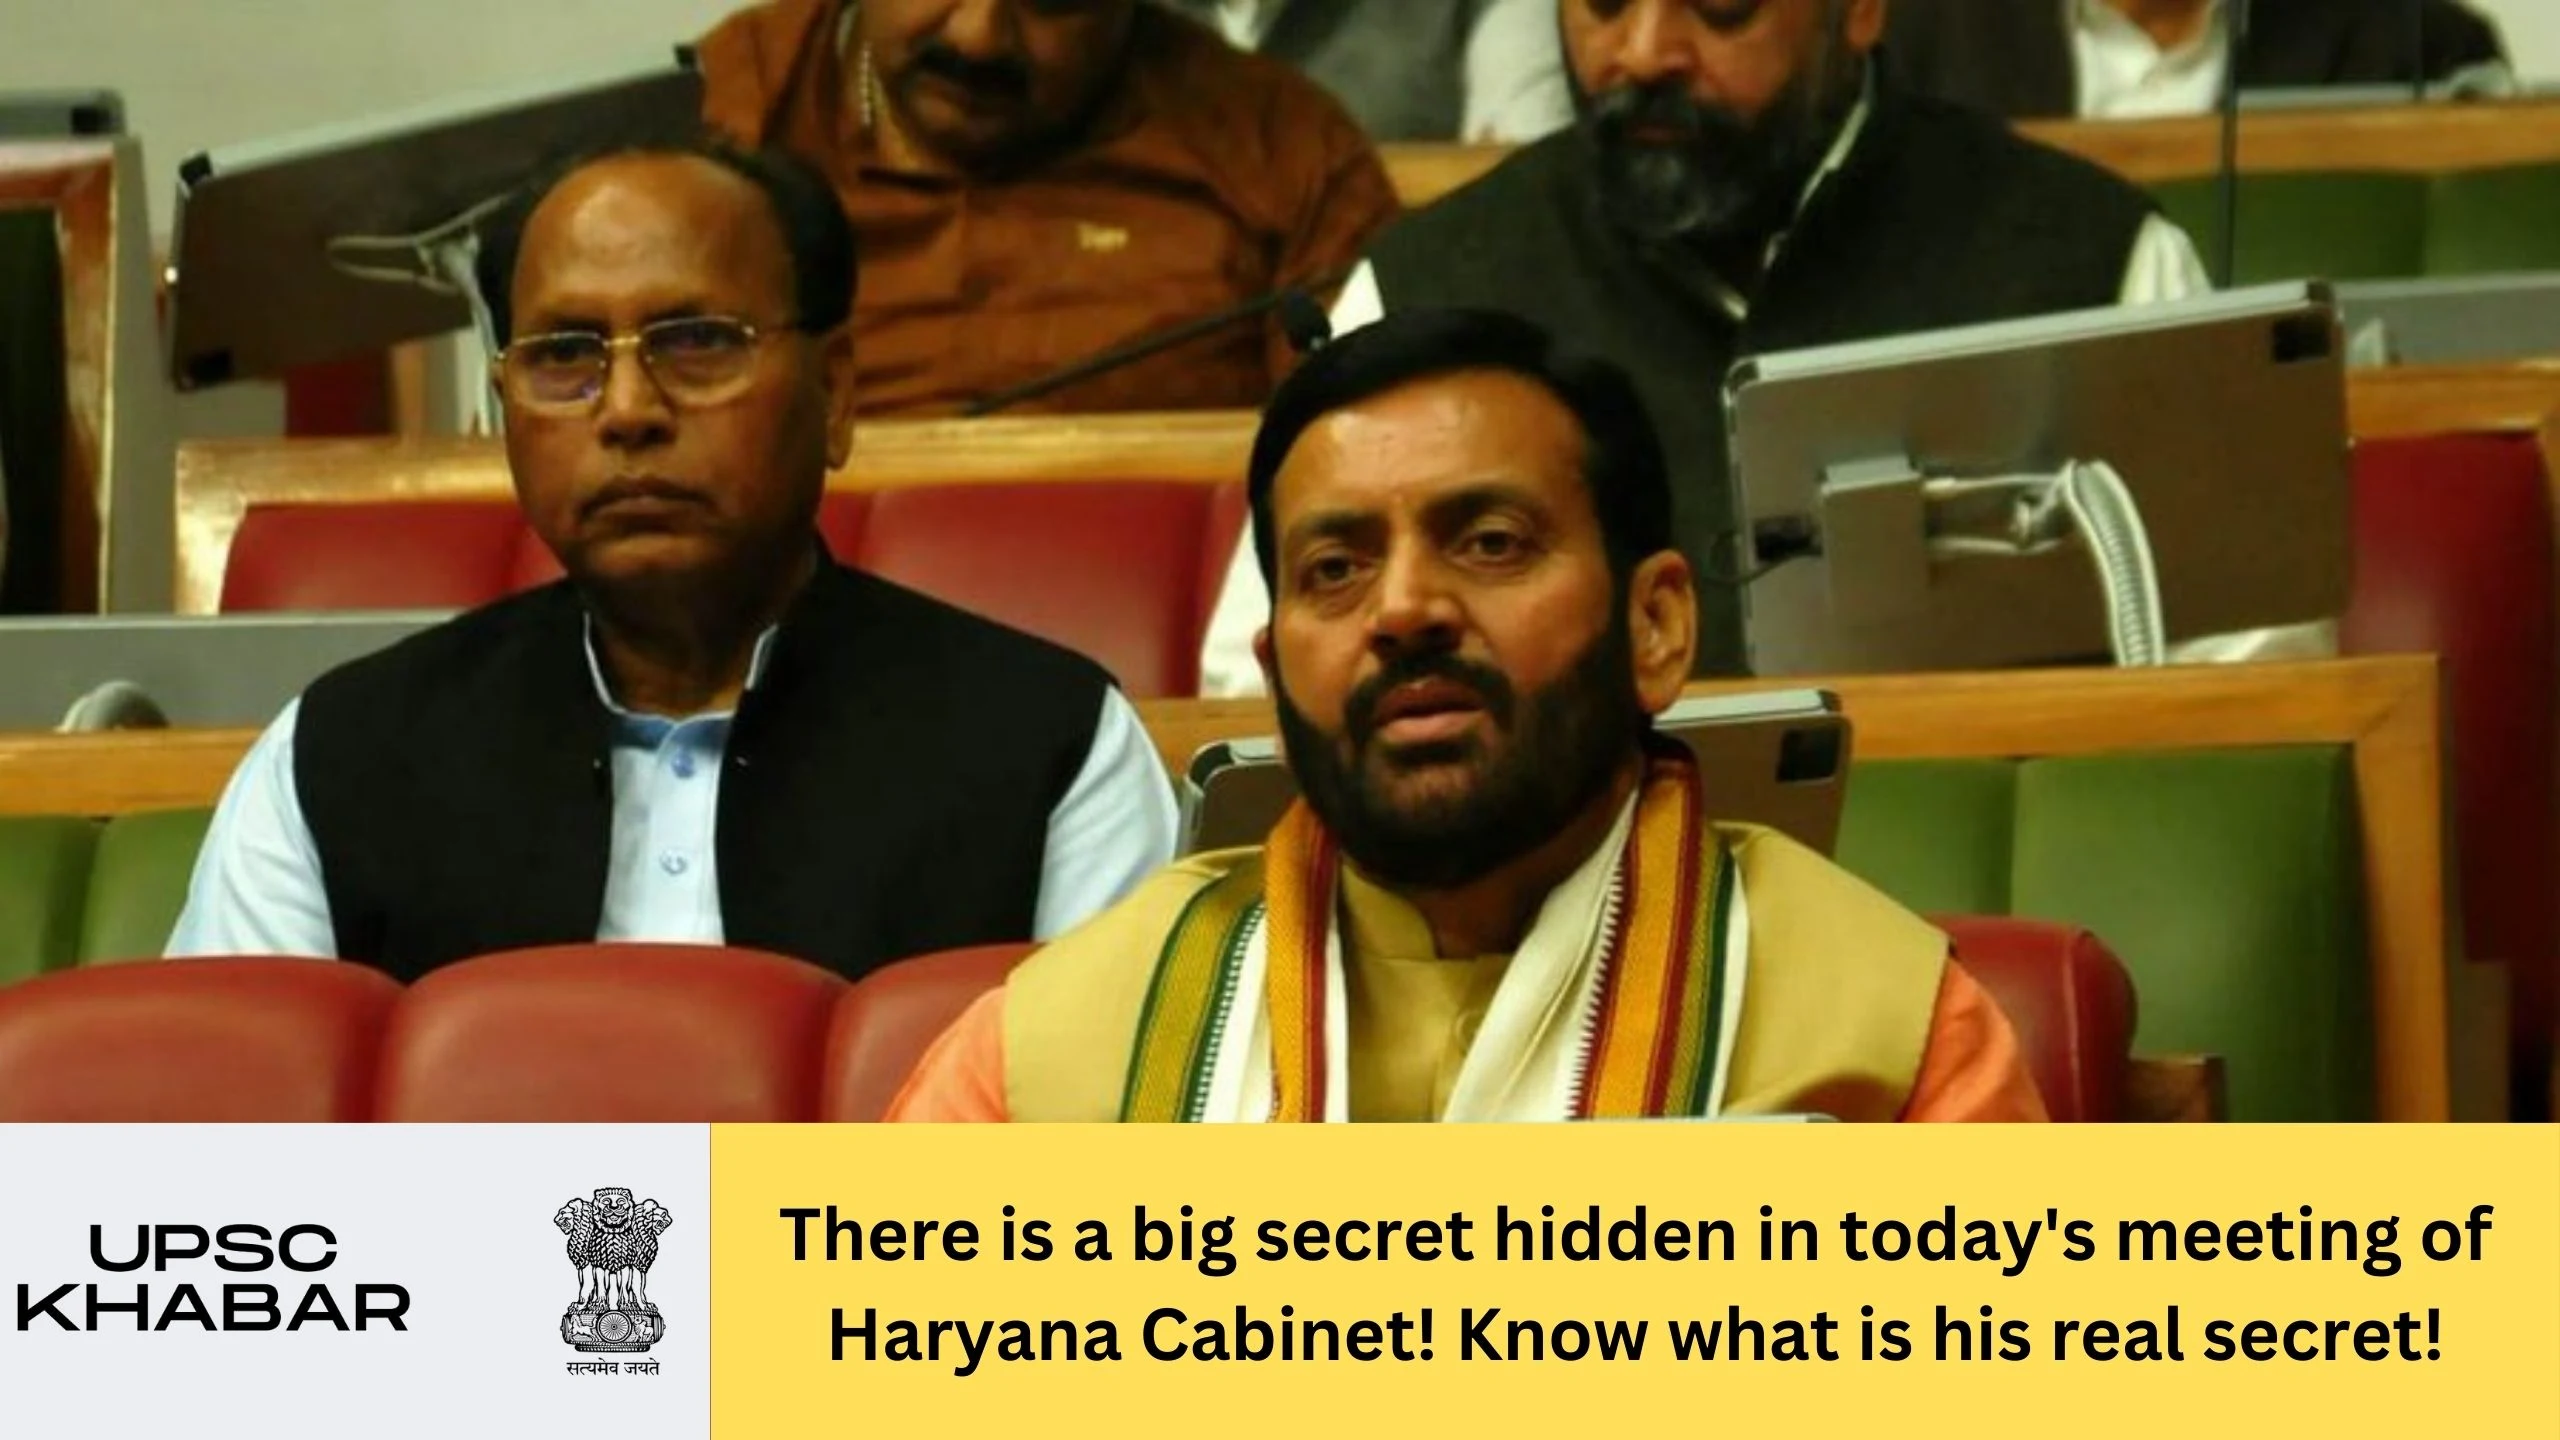 There is a big secret hidden in today's meeting of Haryana Cabinet! Know what is his real secret!